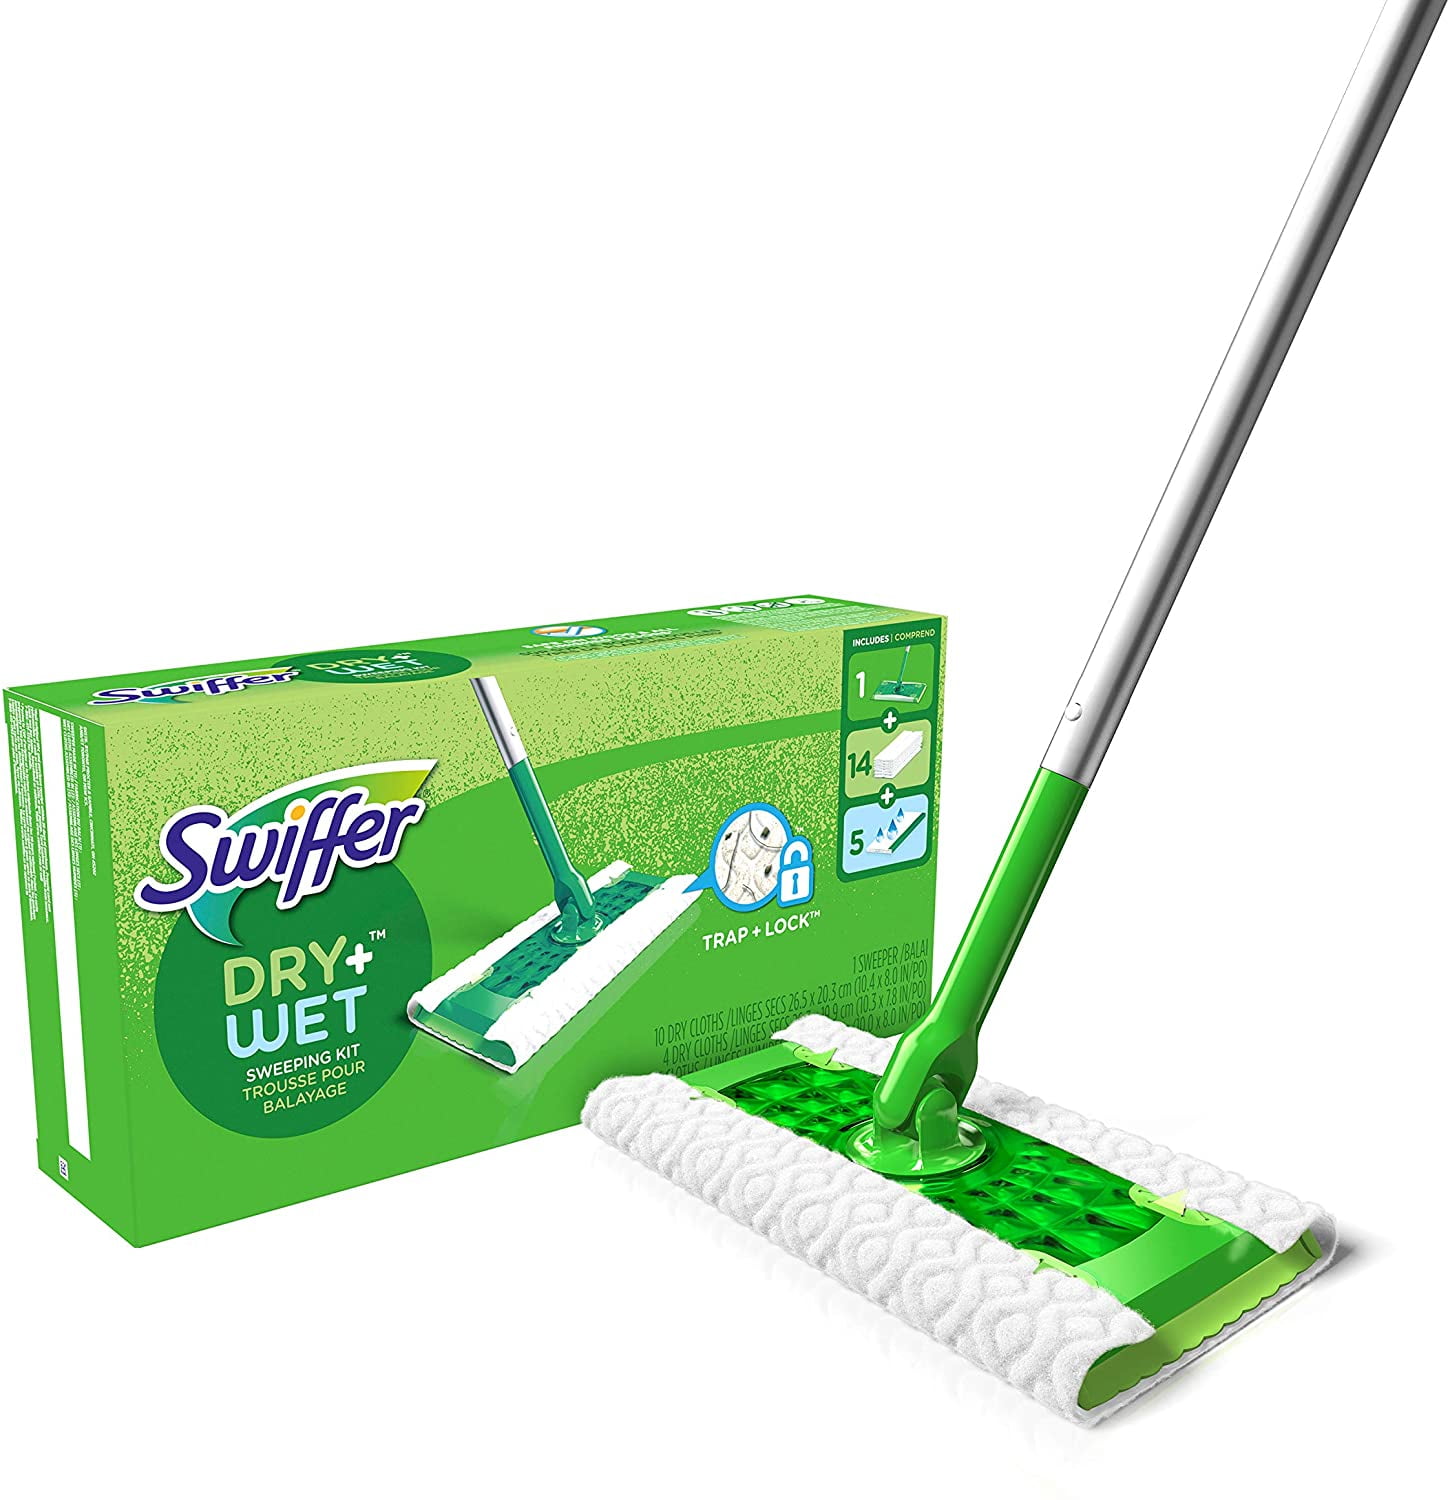 Swiffer Sweeper Dry + Wet All Purpose Floor Mopping and Cleaning Starter  Kit with Heavy Duty Cloths, Includes: 1 Mop, 19 Refills